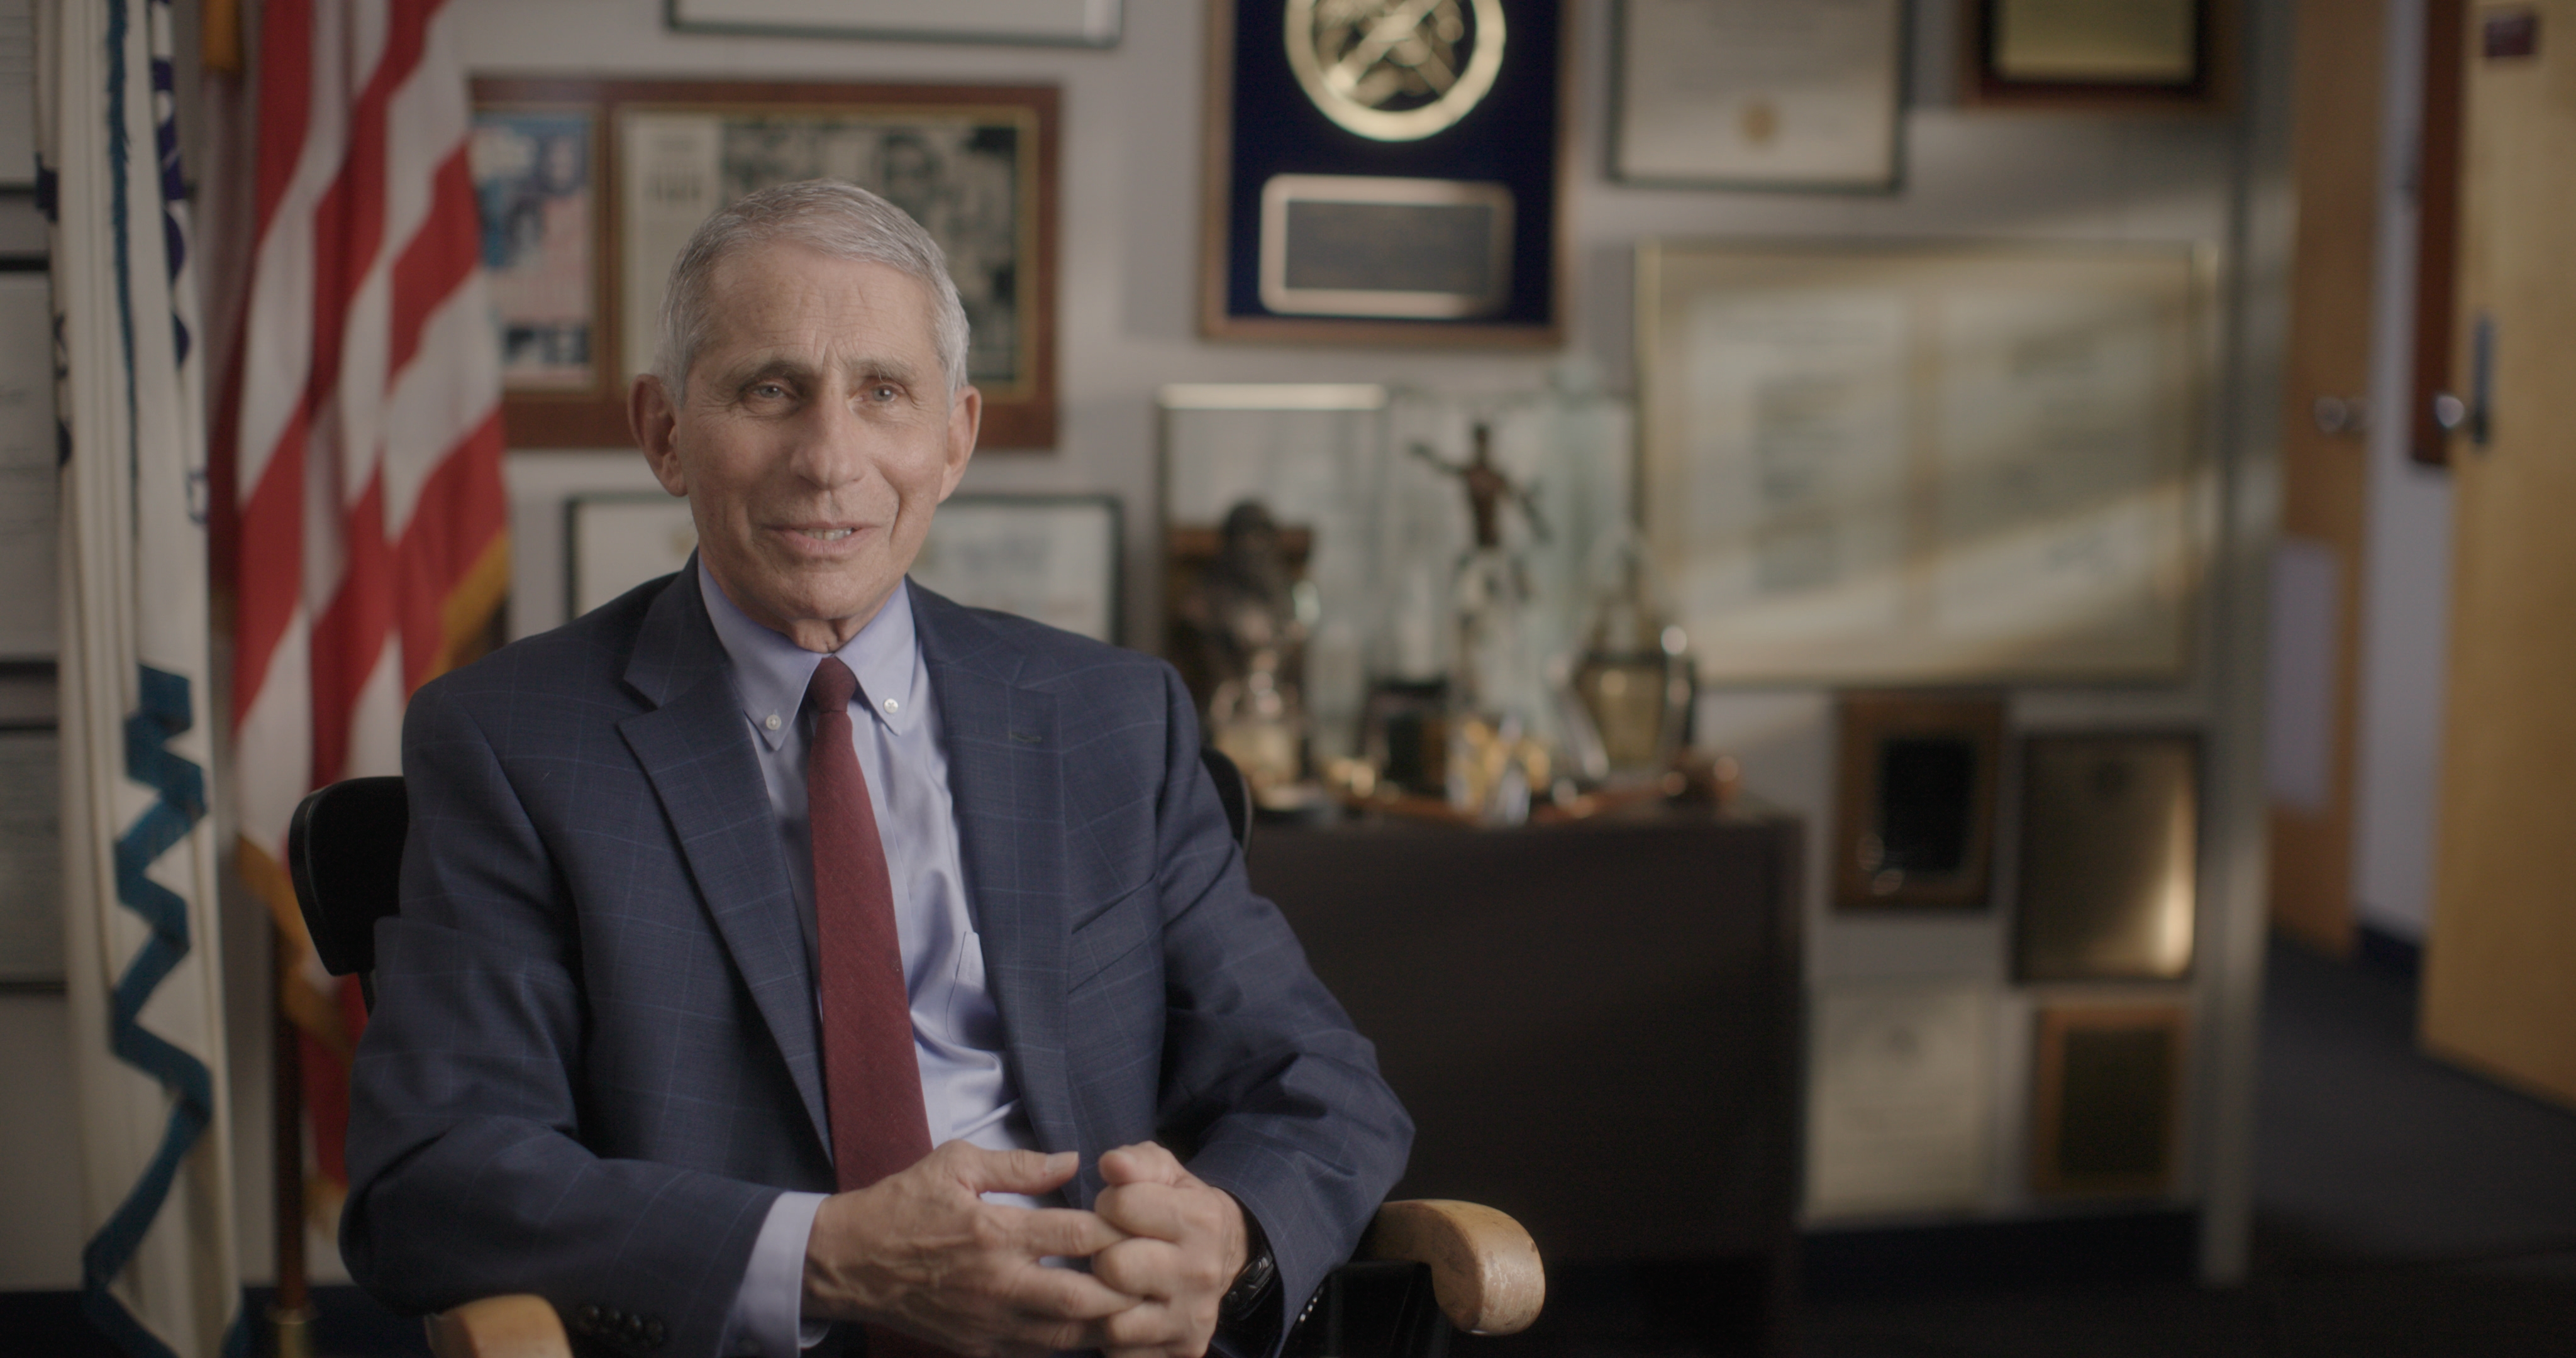 Disney+ National Geographic Documentary ‘Fauci’ Debuts Trailer